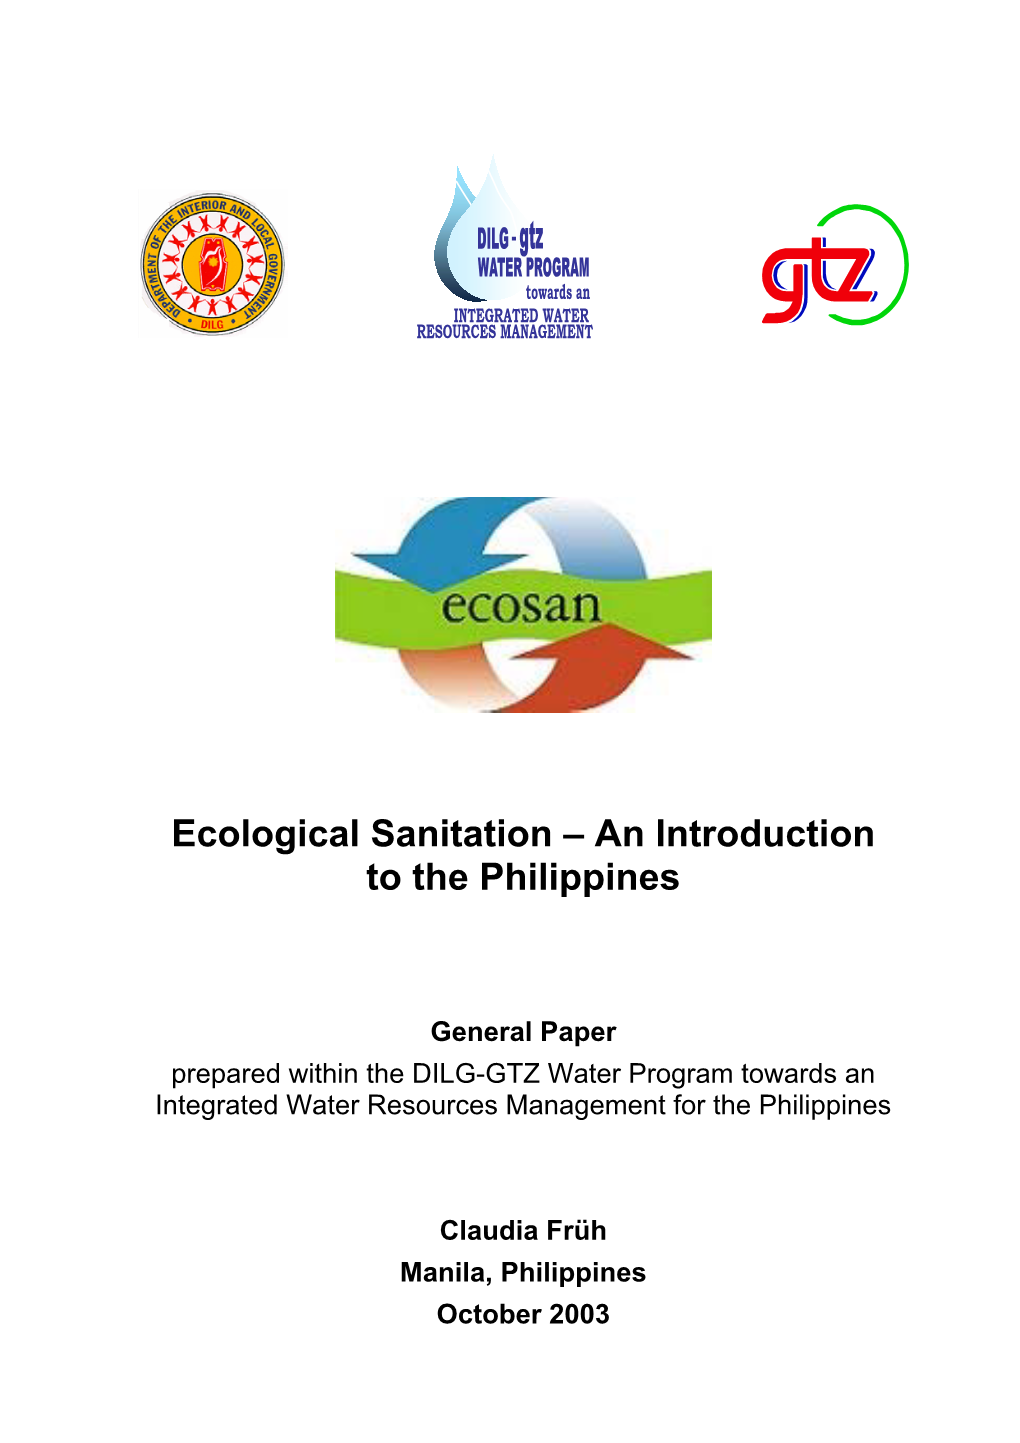 Ecological Sanitation – an Introduction to the Philippines